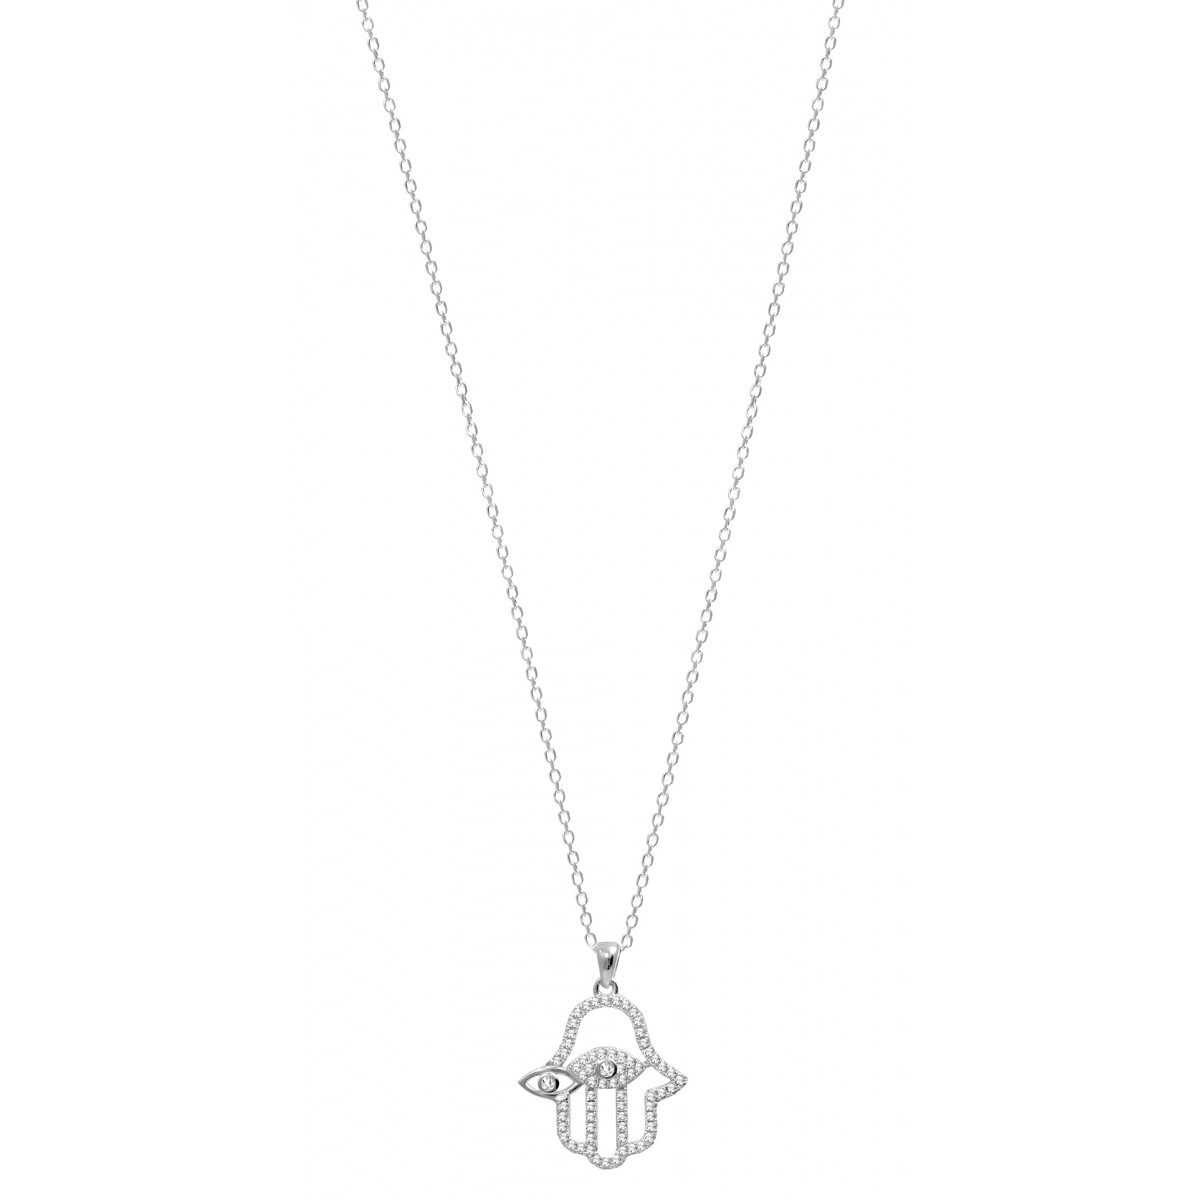 Buy Hand Necklace with Cz Stone in Hamsa Necklaces